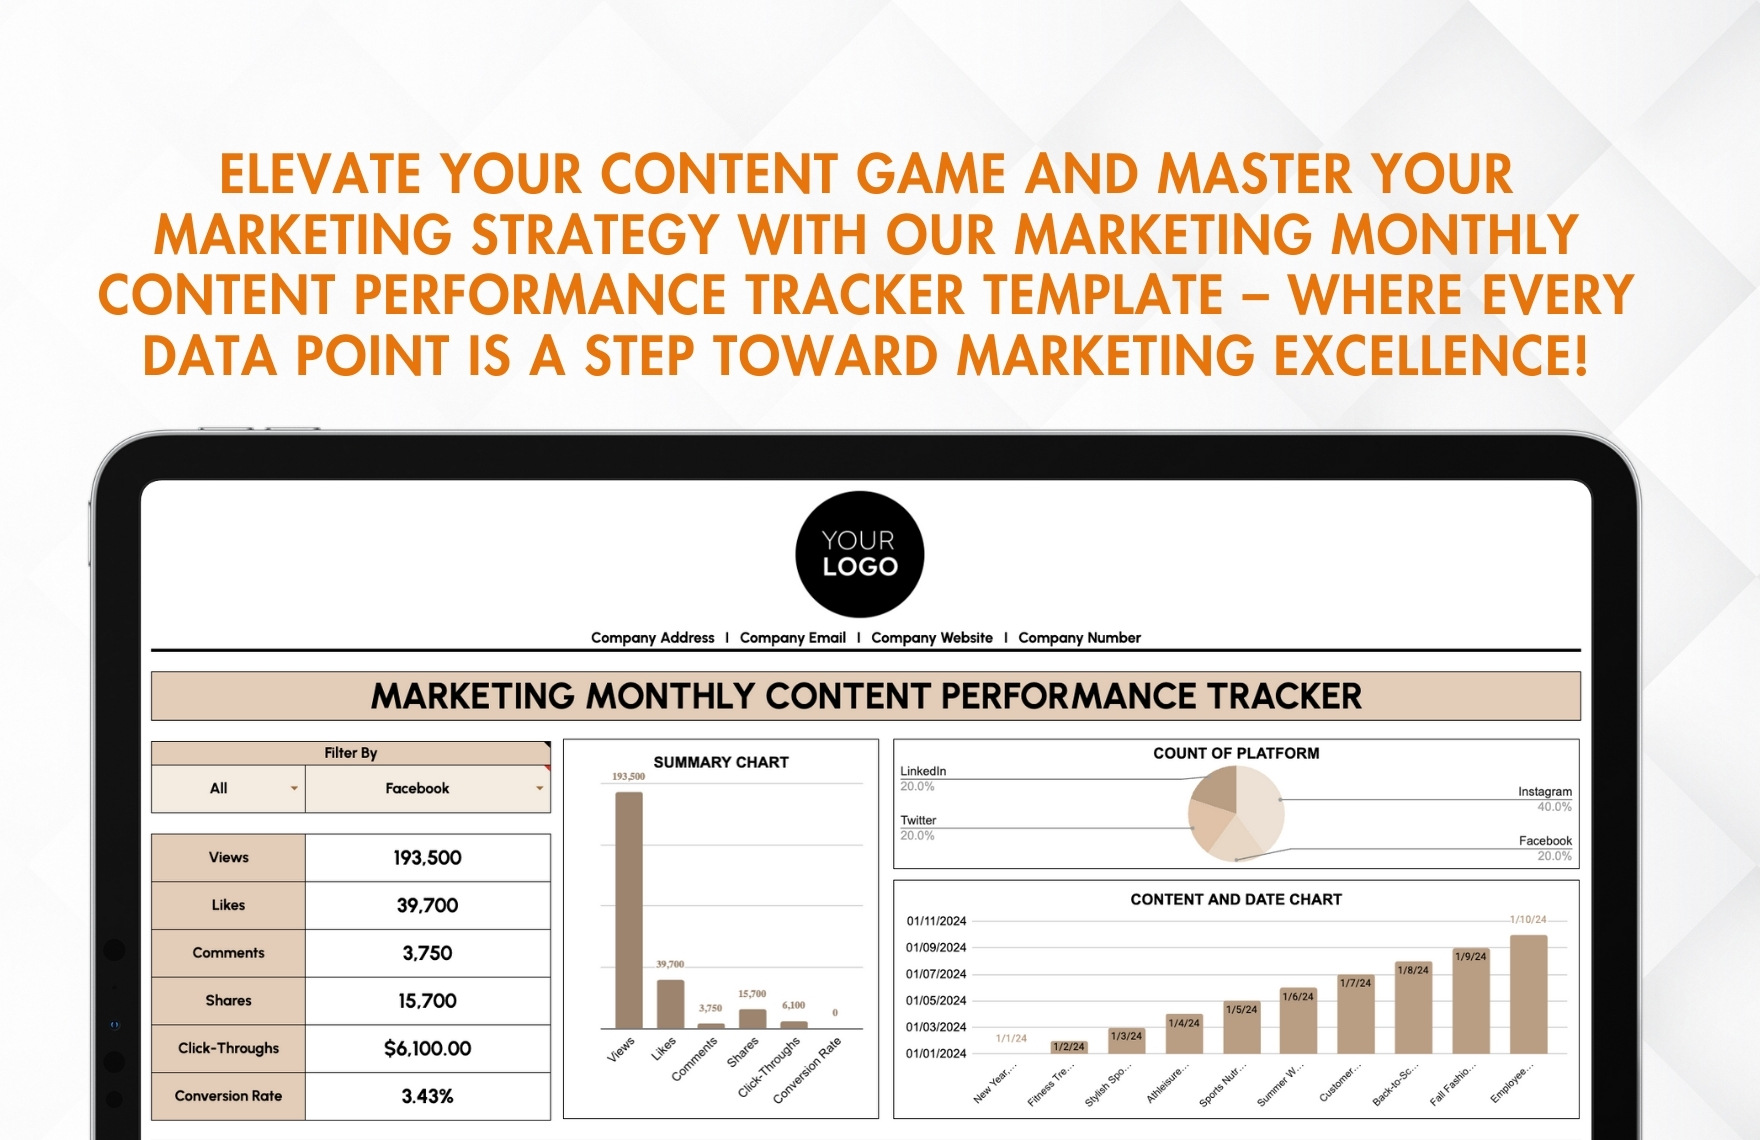 Marketing Monthly Content Performance Tracker Template